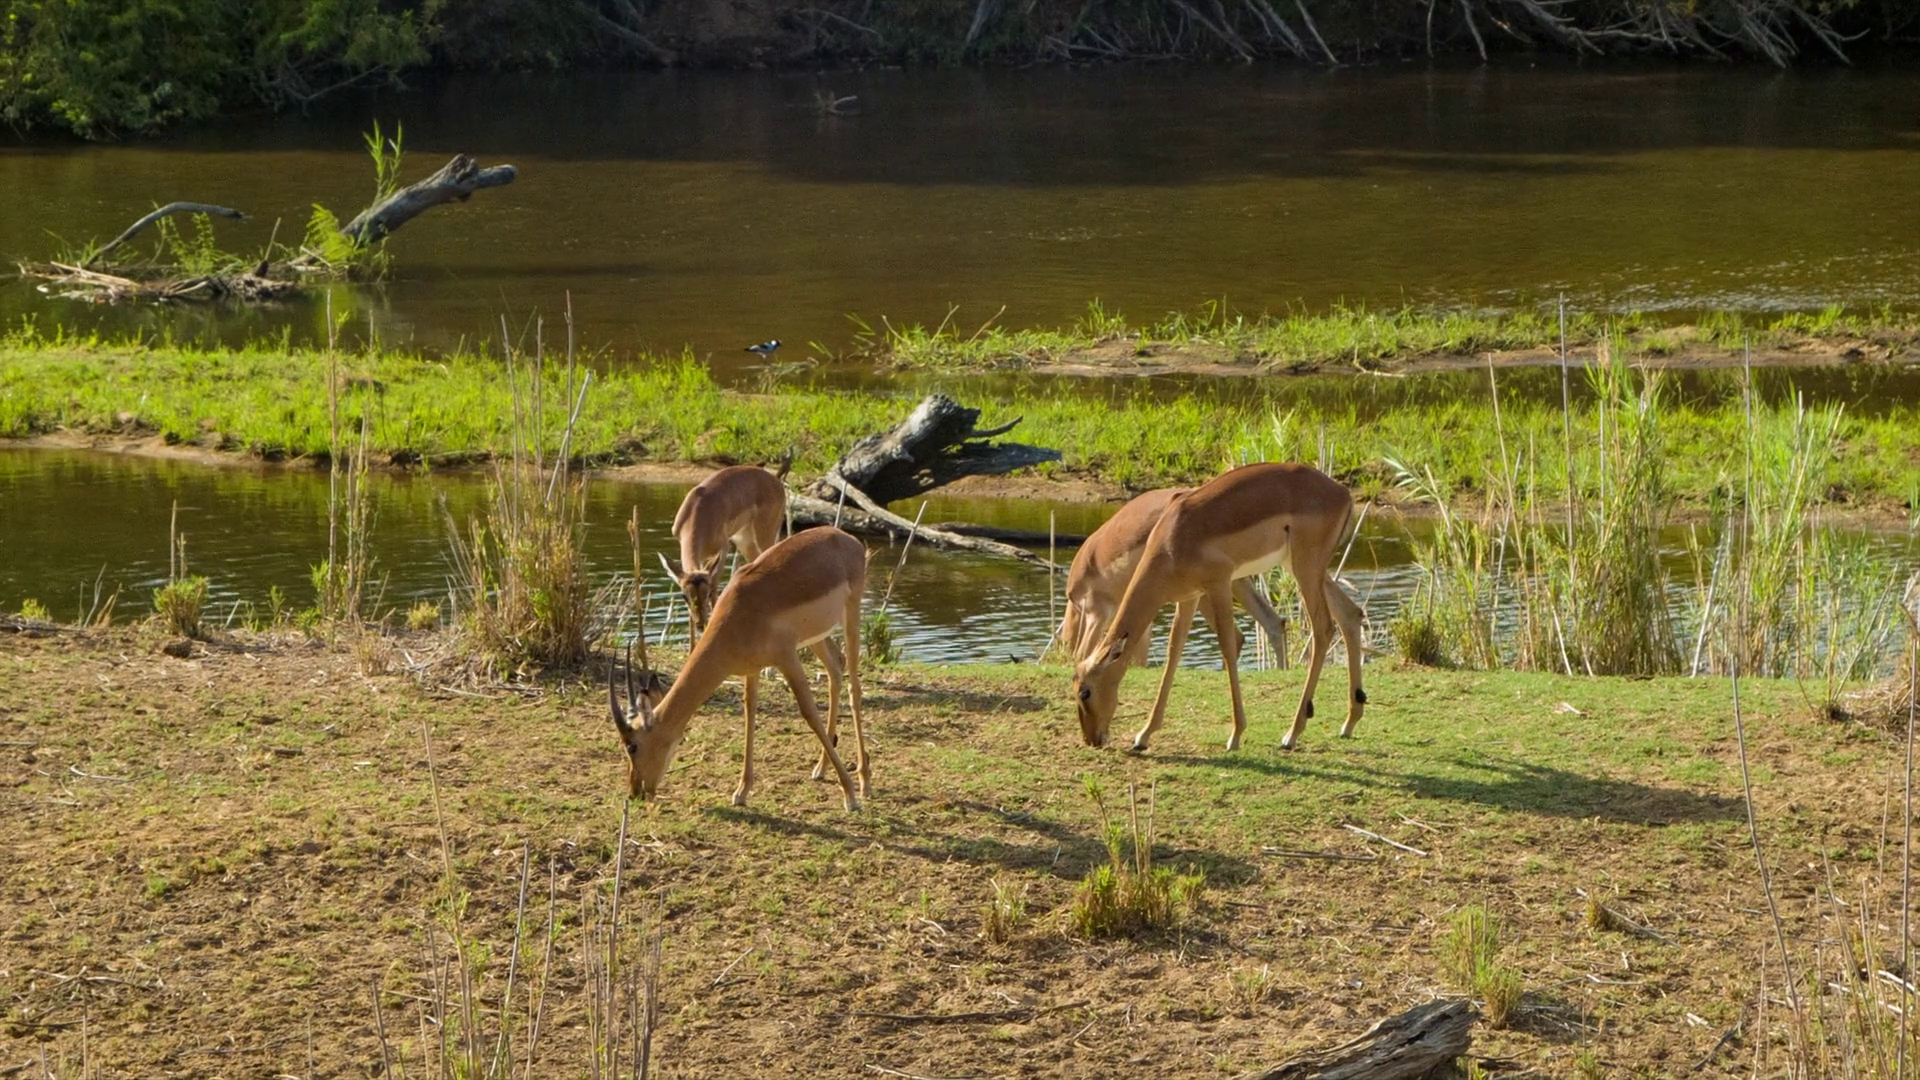 Vibrant Impala at Riverside African Nature Scene with the Antelope ...